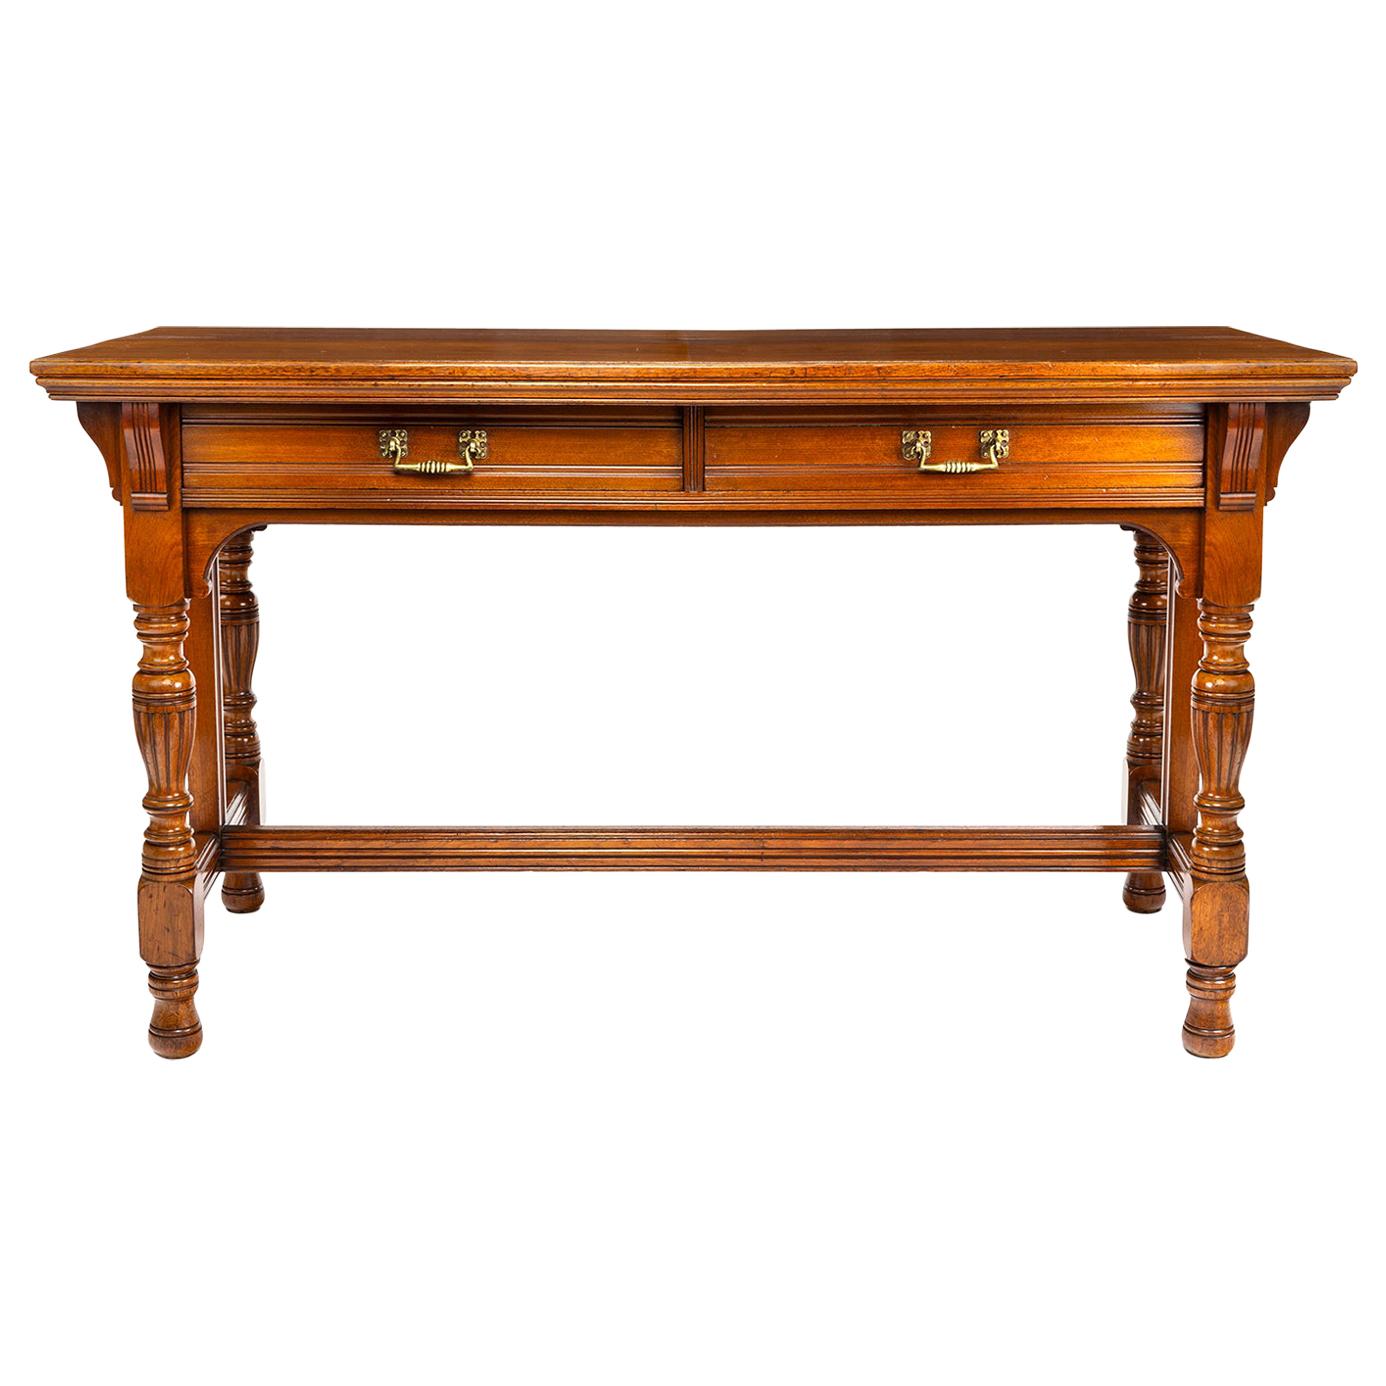 Gillows American Black Walnut Library Table